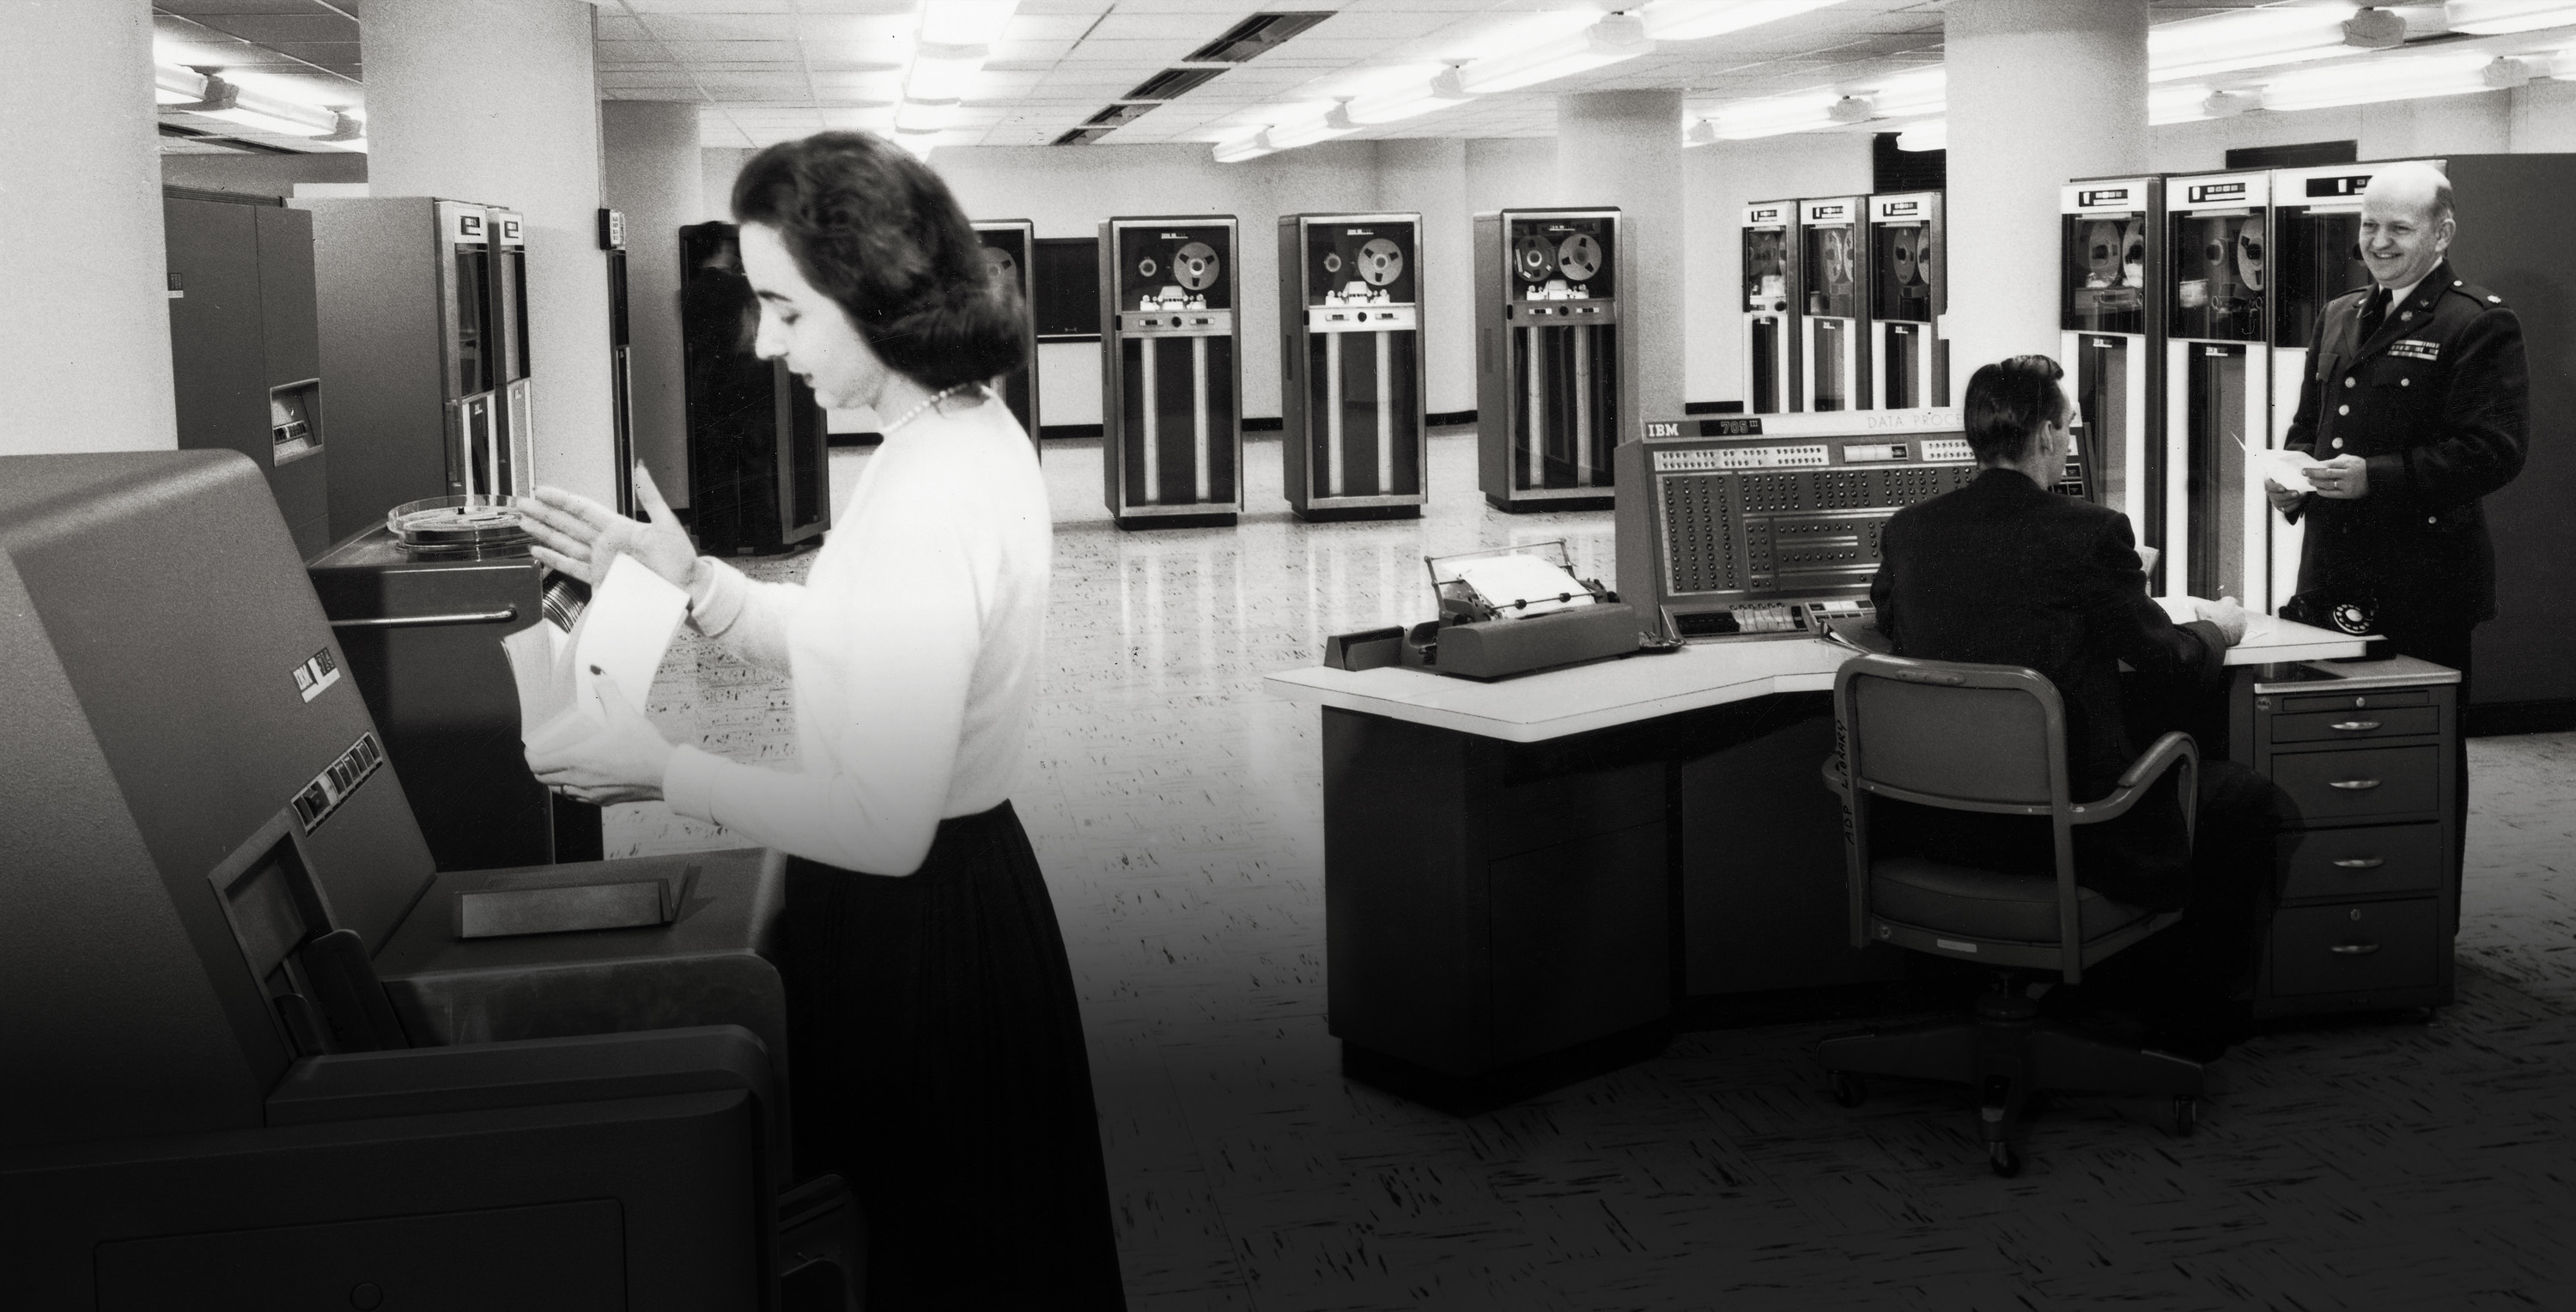 Circa 1955, a female office worker sorts punch cards as two men talk near the console of an IBM 705 III mainframe computer, owned by the US Army.